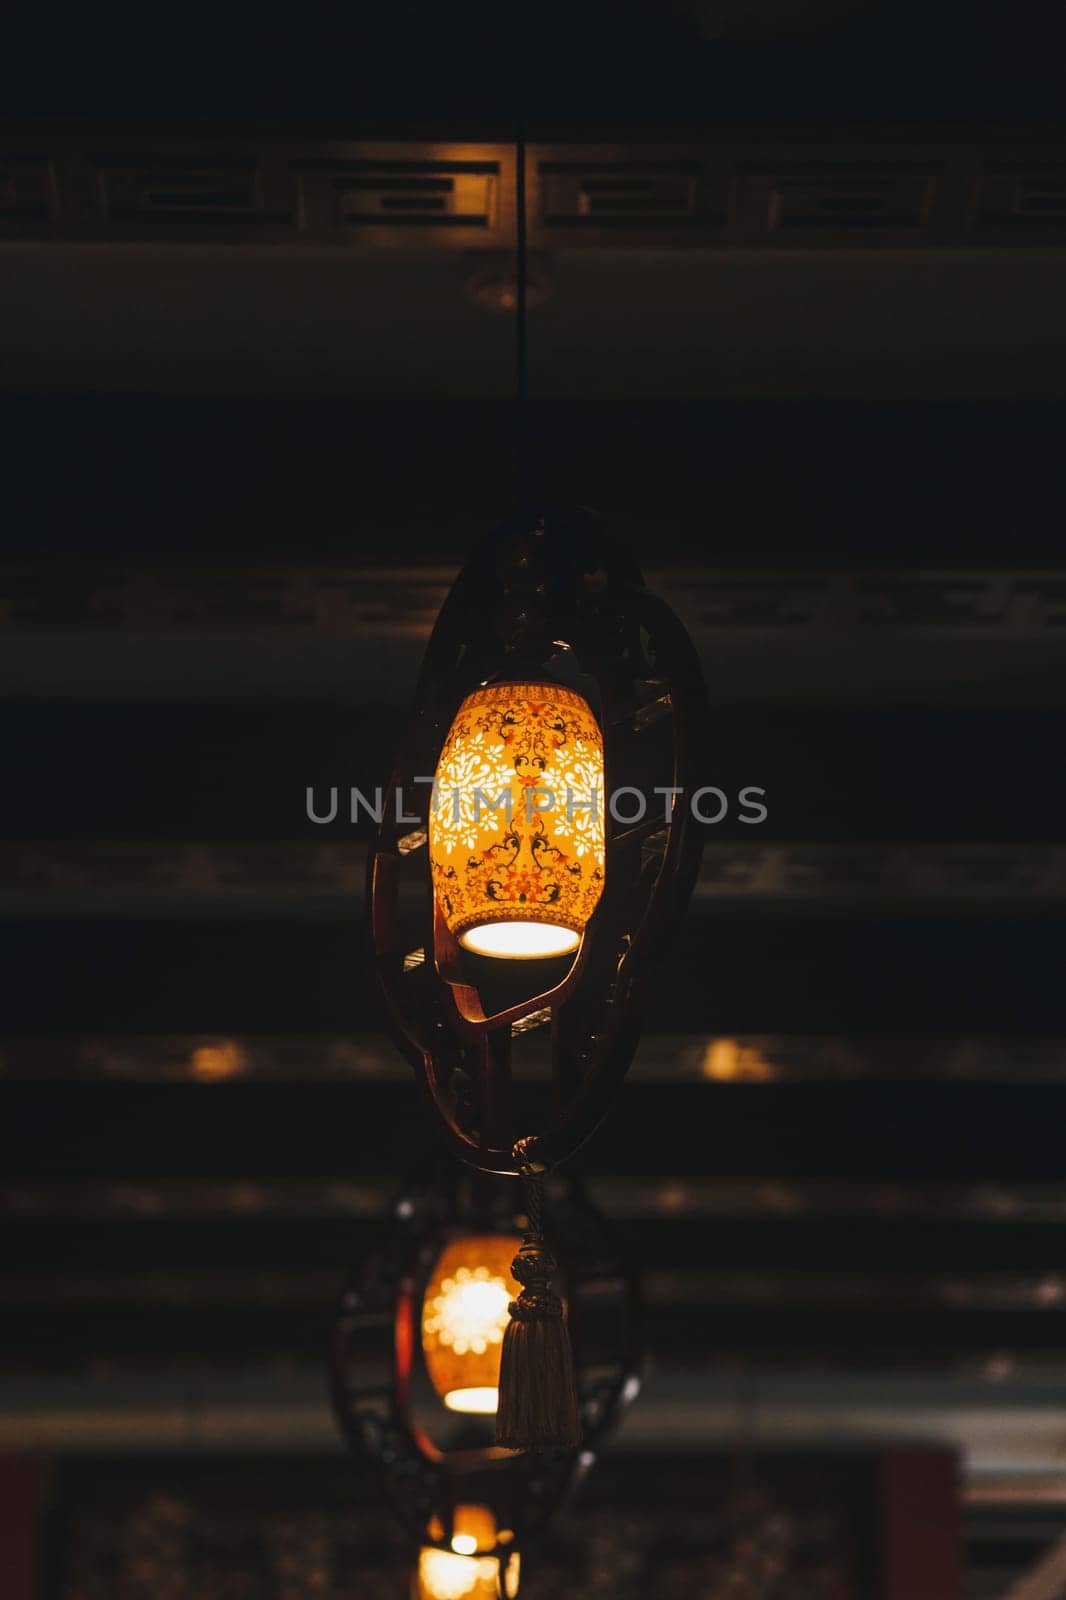 modern hanging lights in the dark interior of a cafe or restaurant